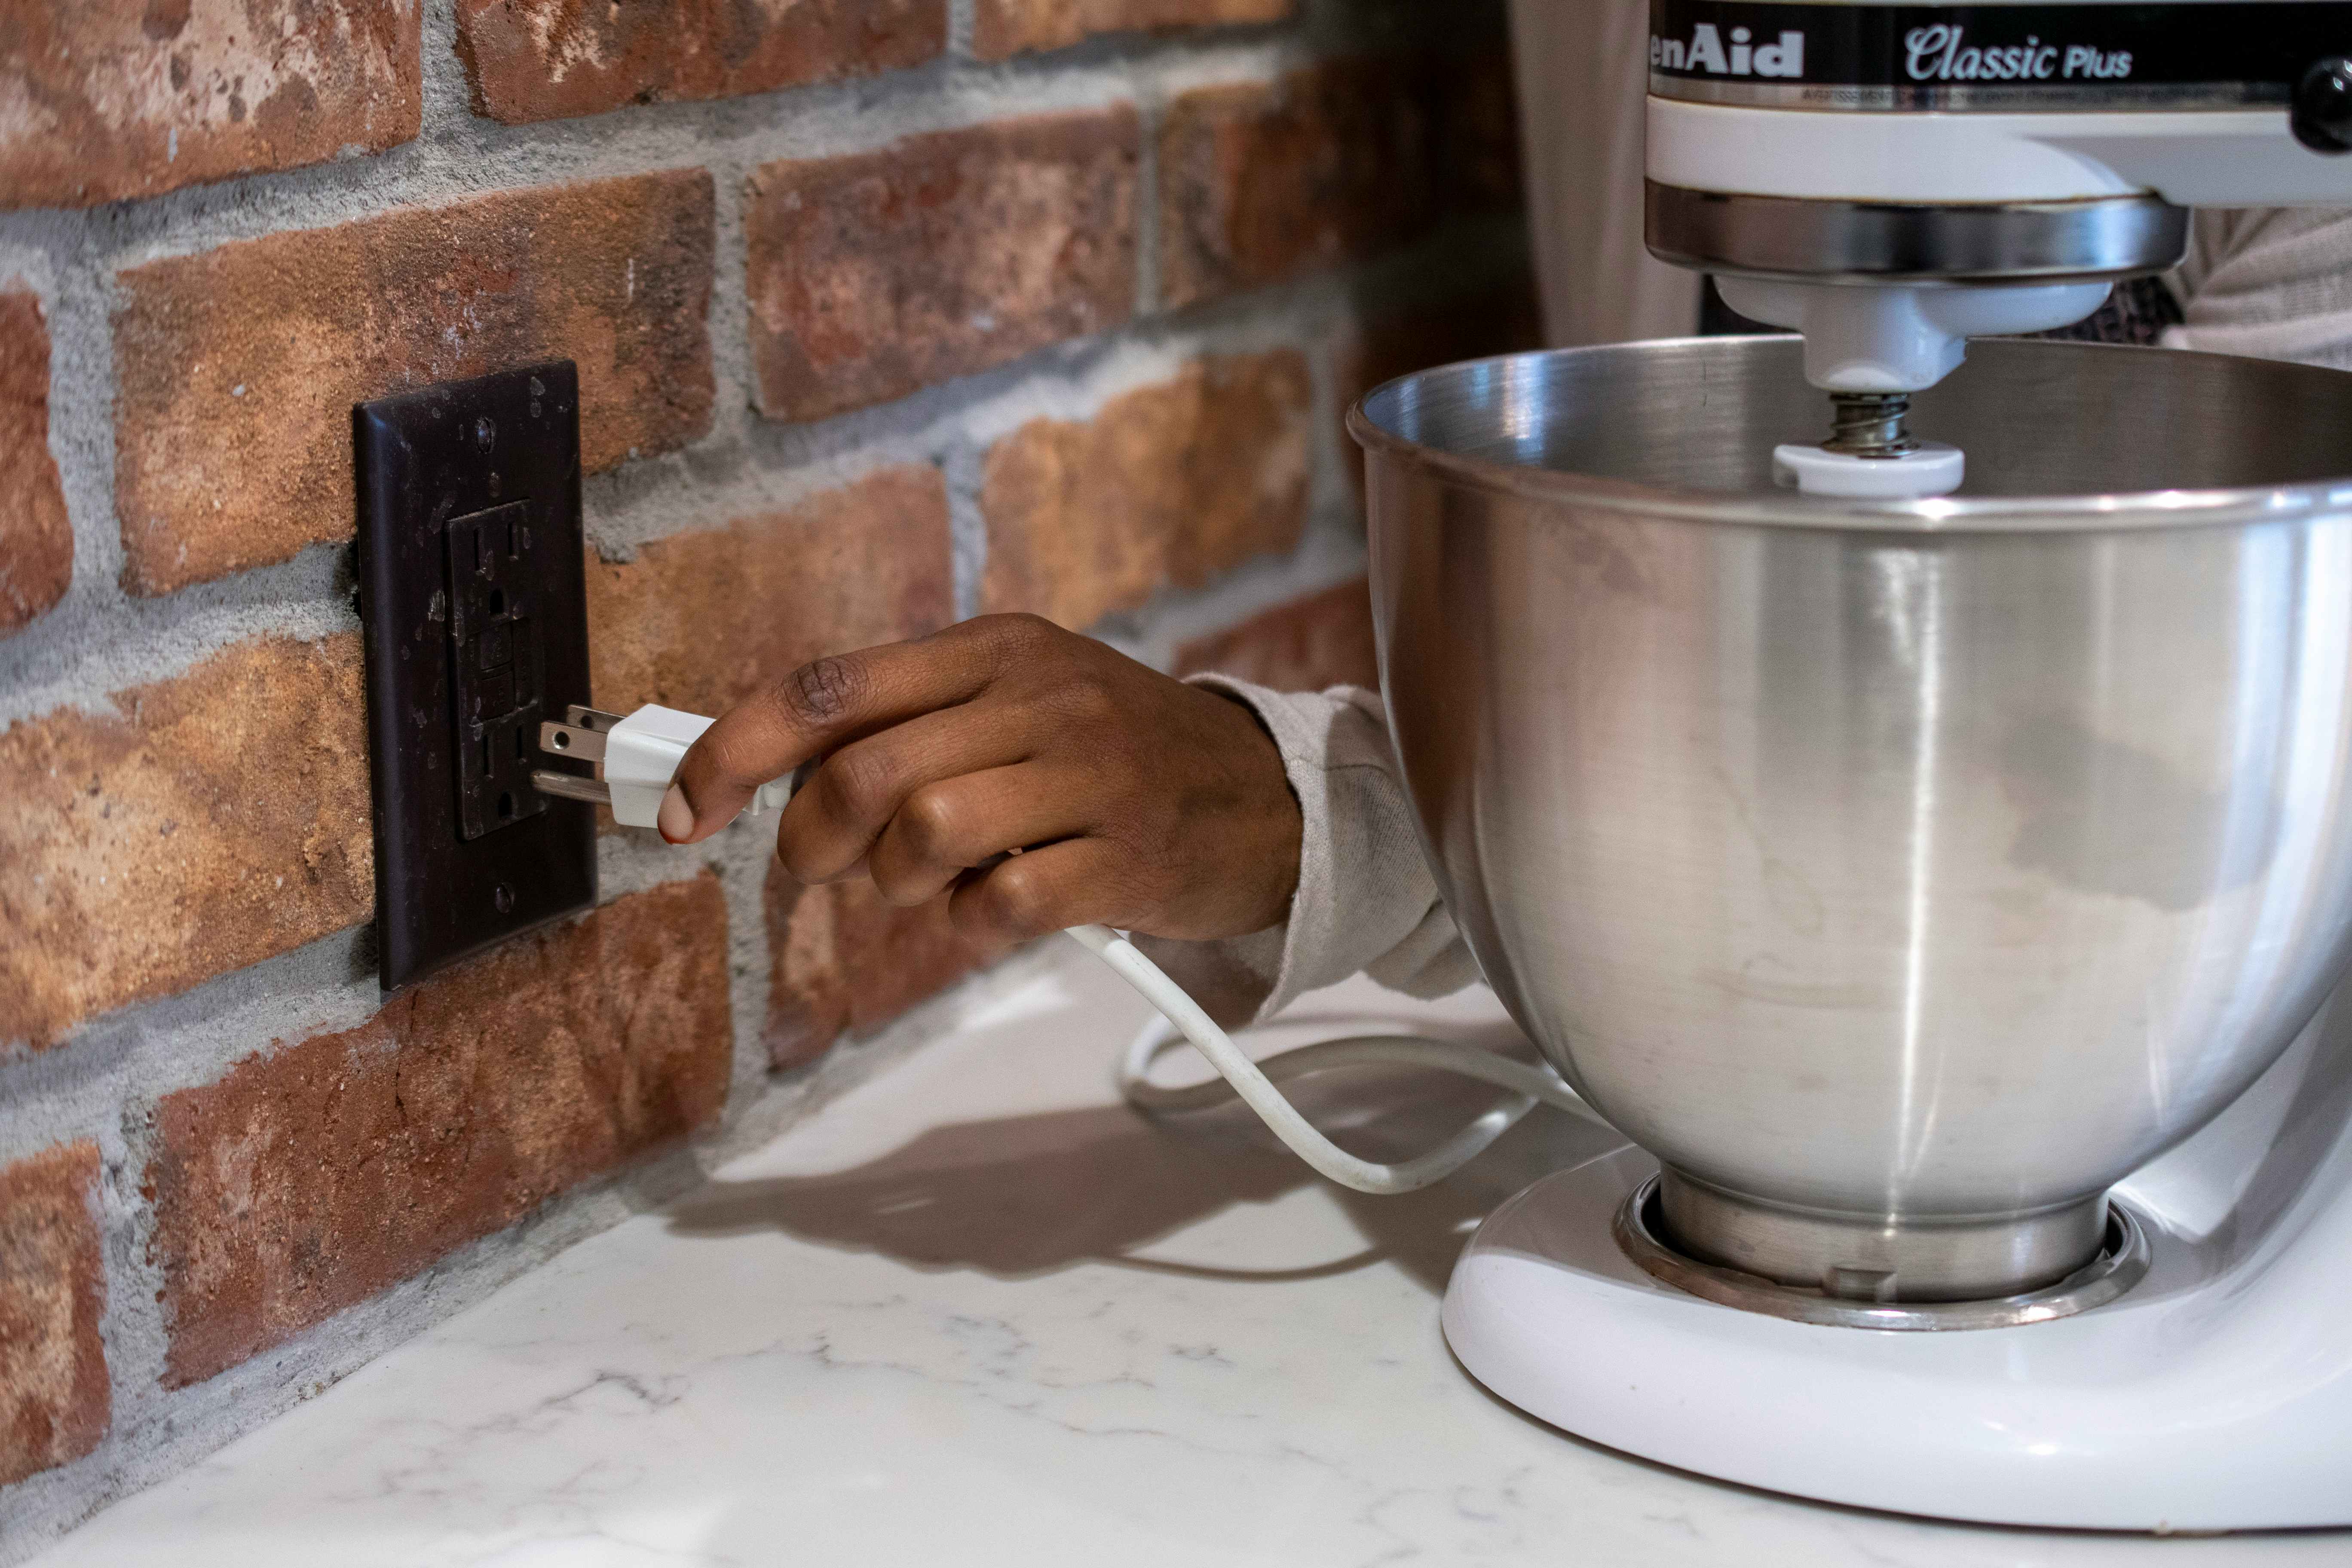 A person plugging in a kitchenAid mixer